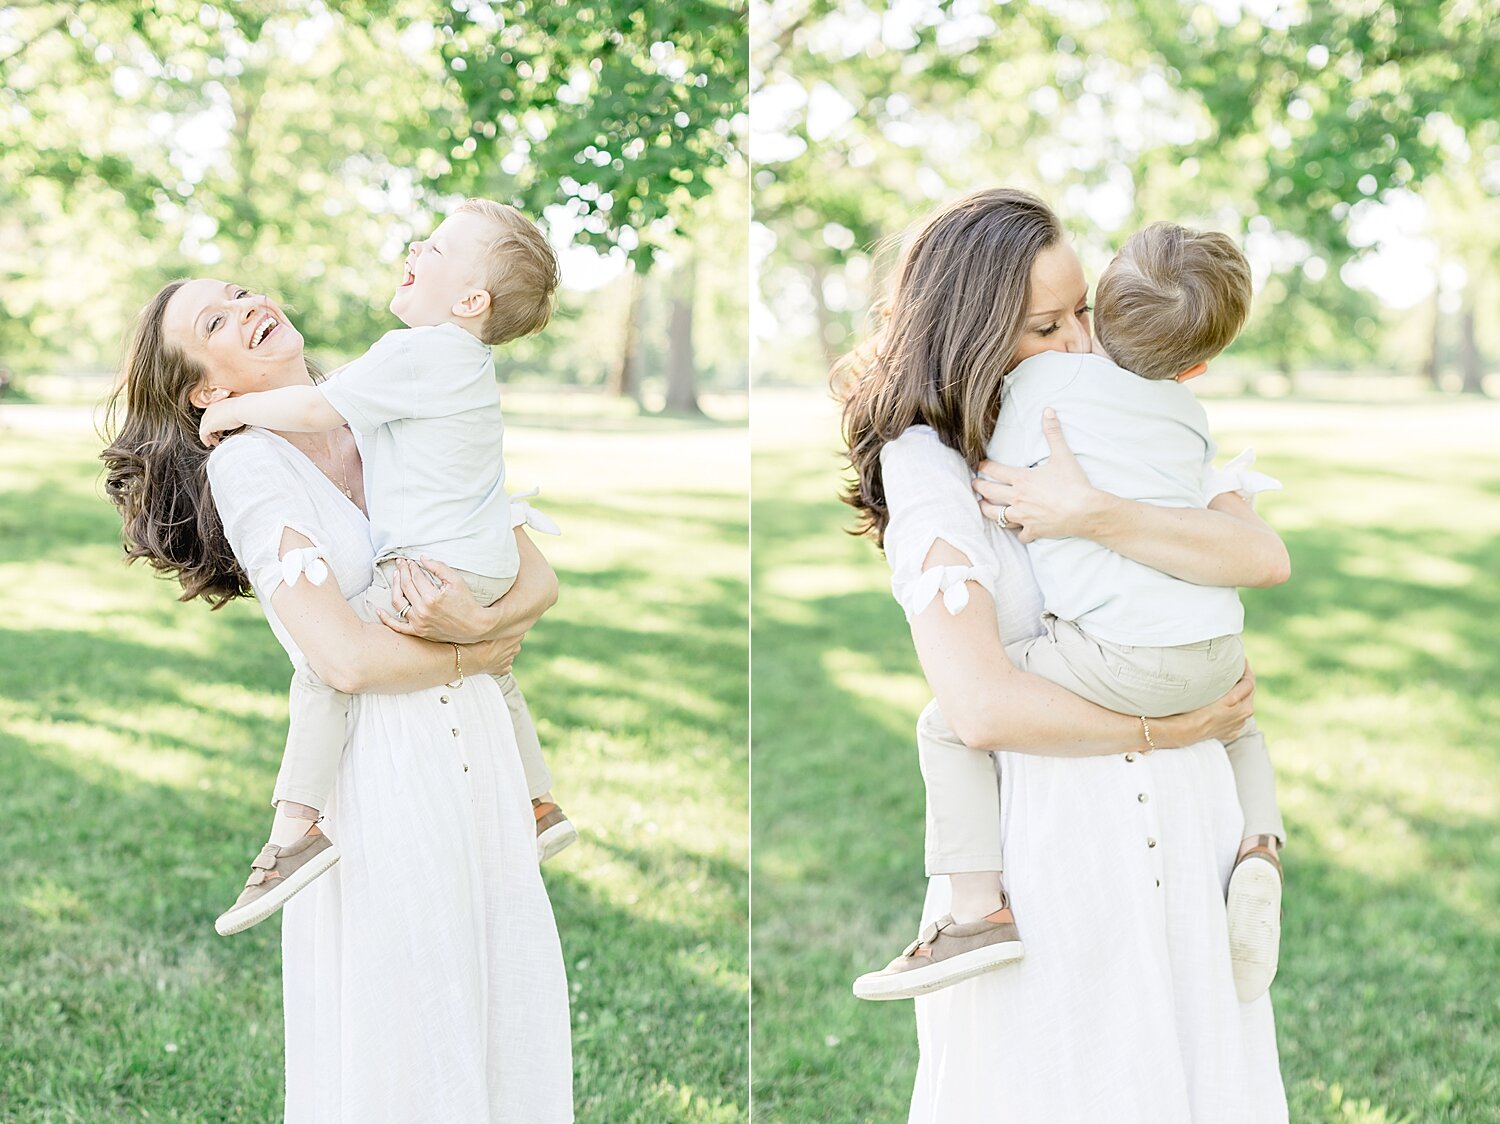 Mom playing with her son | Kristin Wood Photography